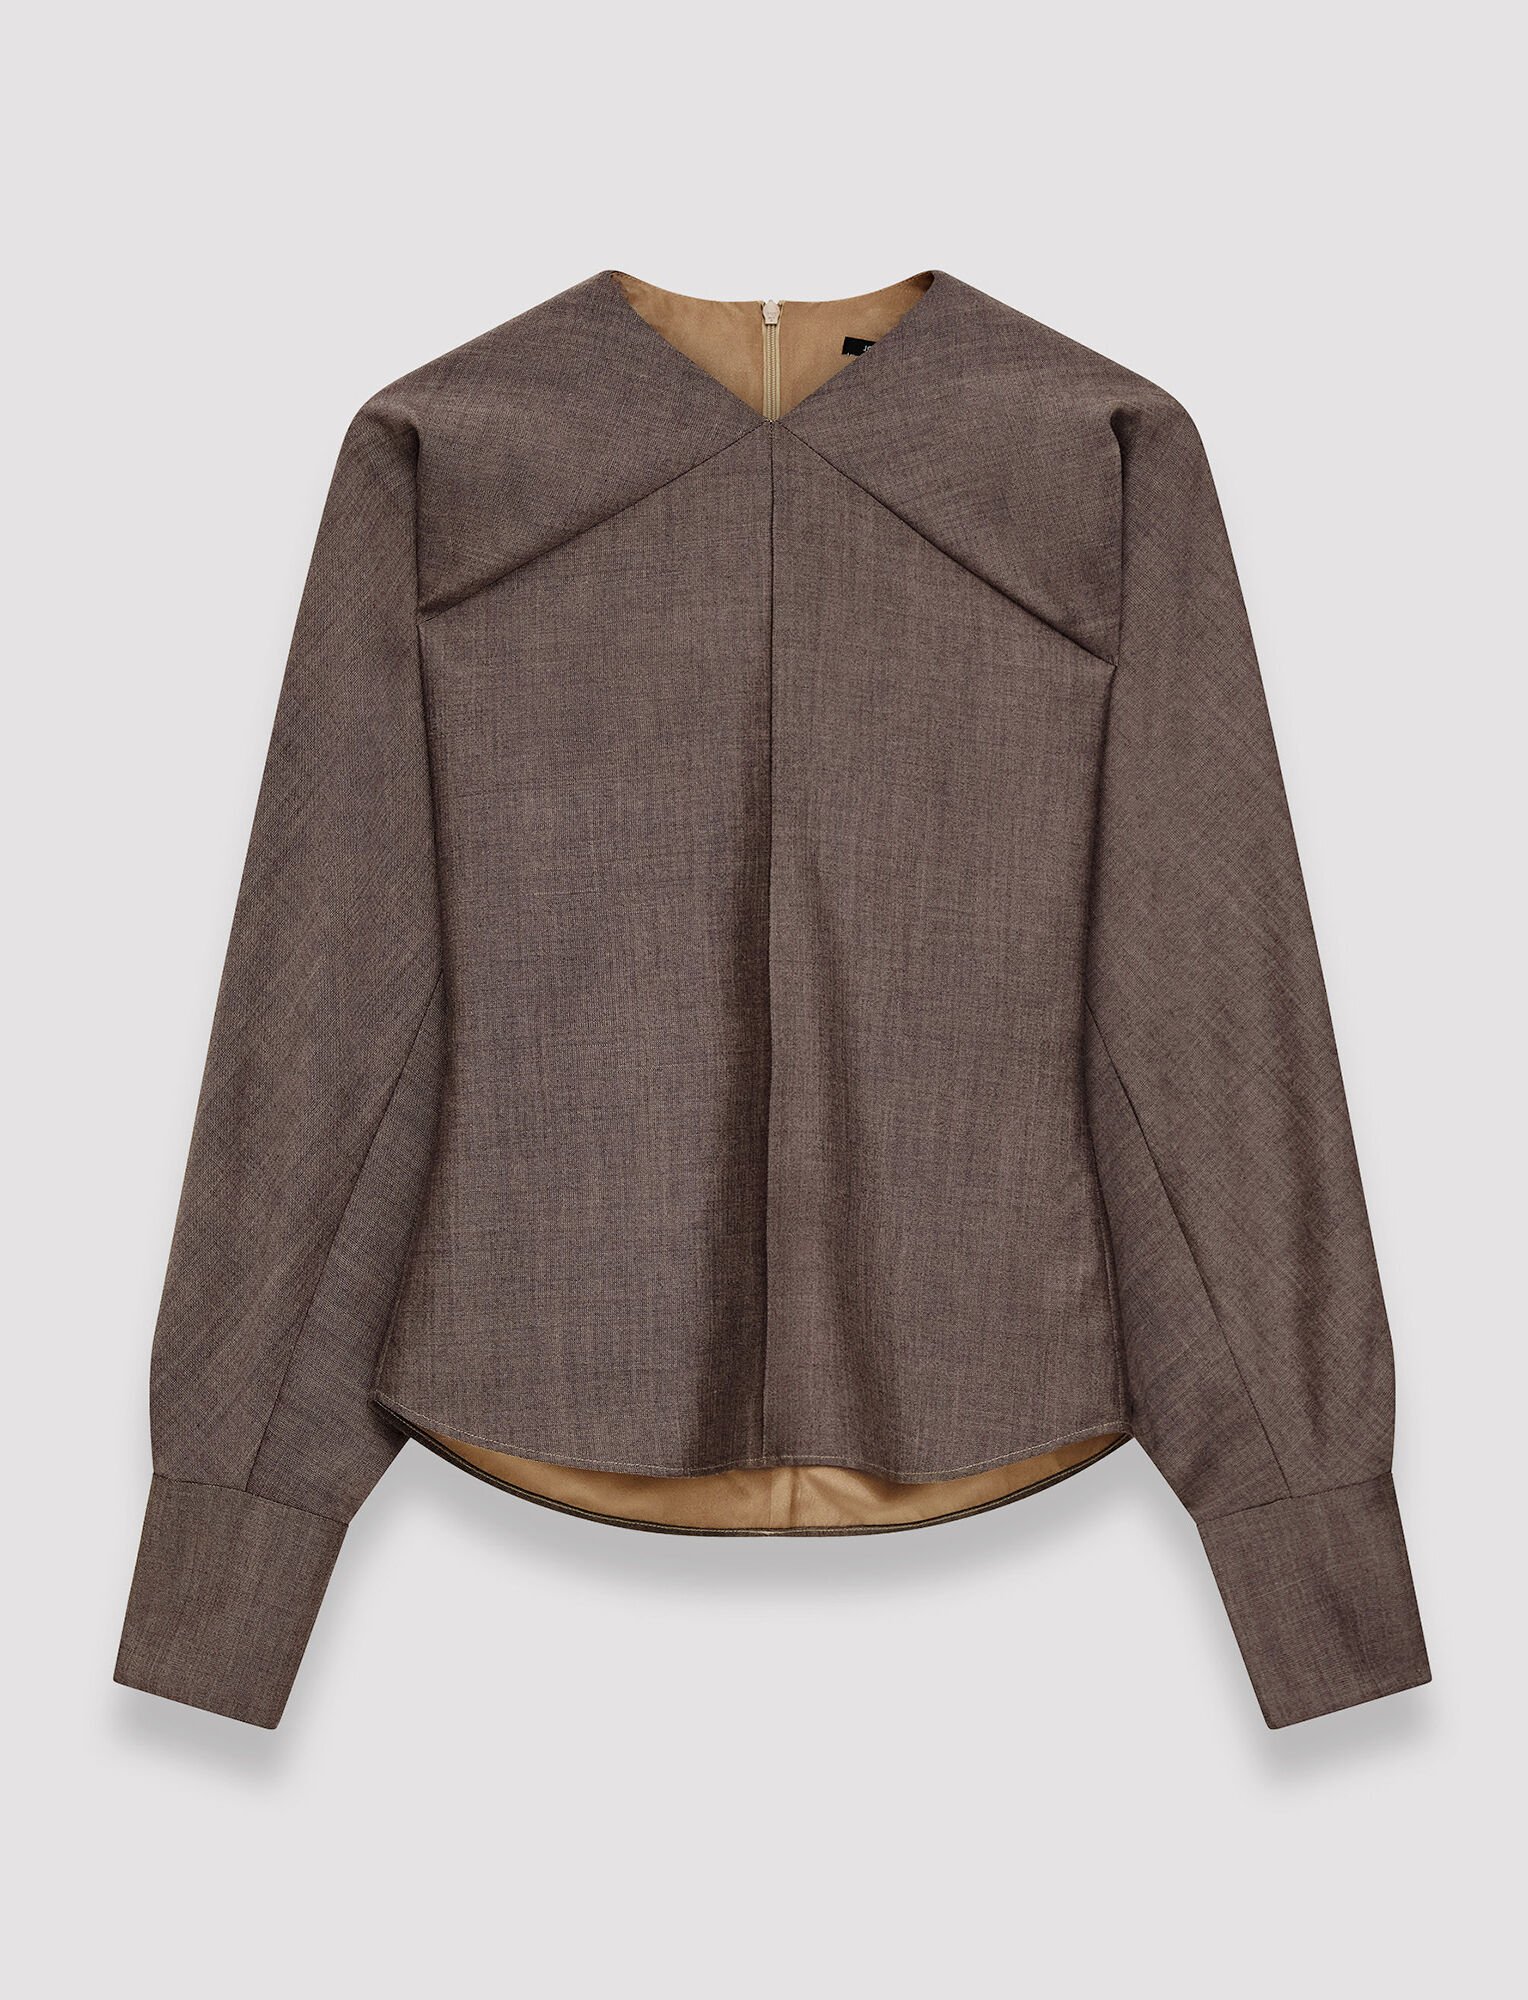 Joseph, Chemisier Burnaby en tailleur laine, in Warm Taupe Combo